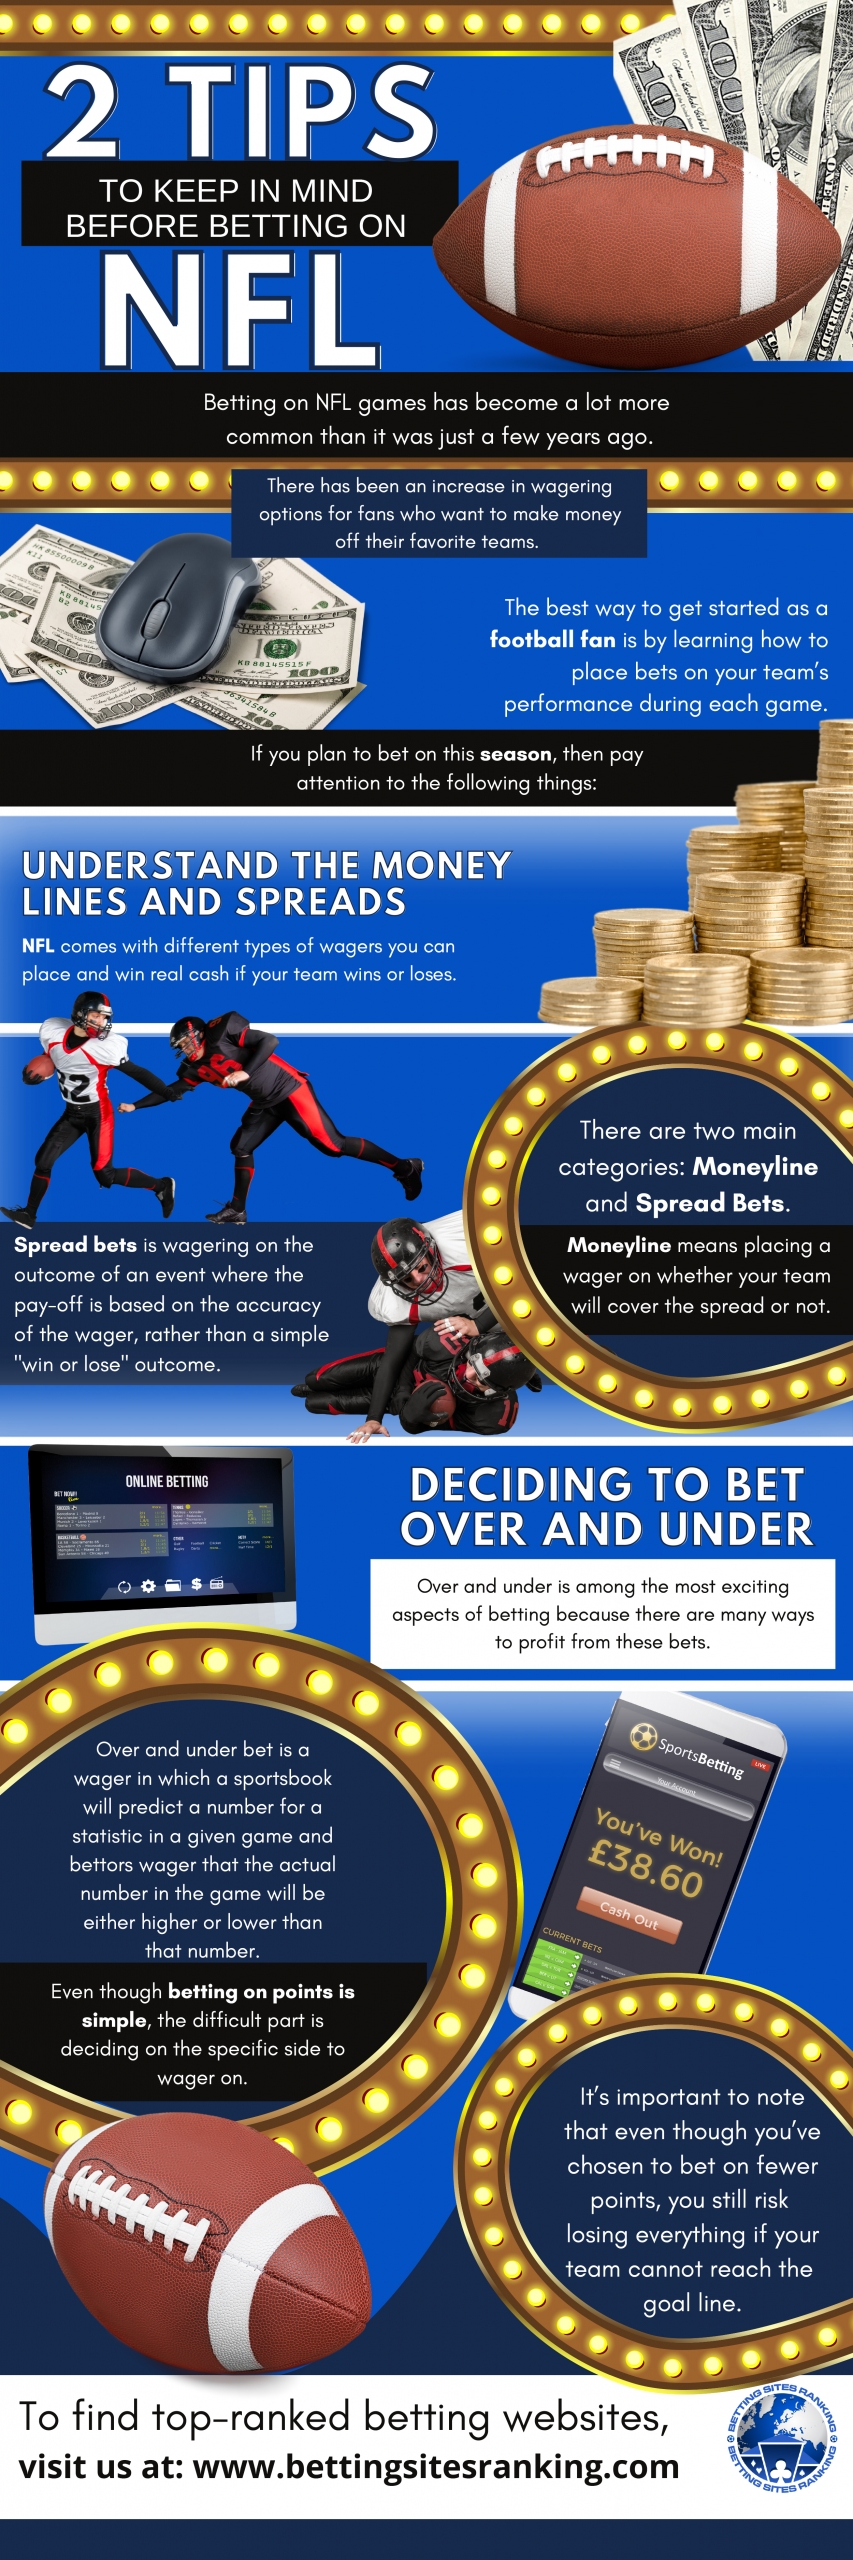 2-Tips-to-keep-in-mind-before-betting-on-NFL